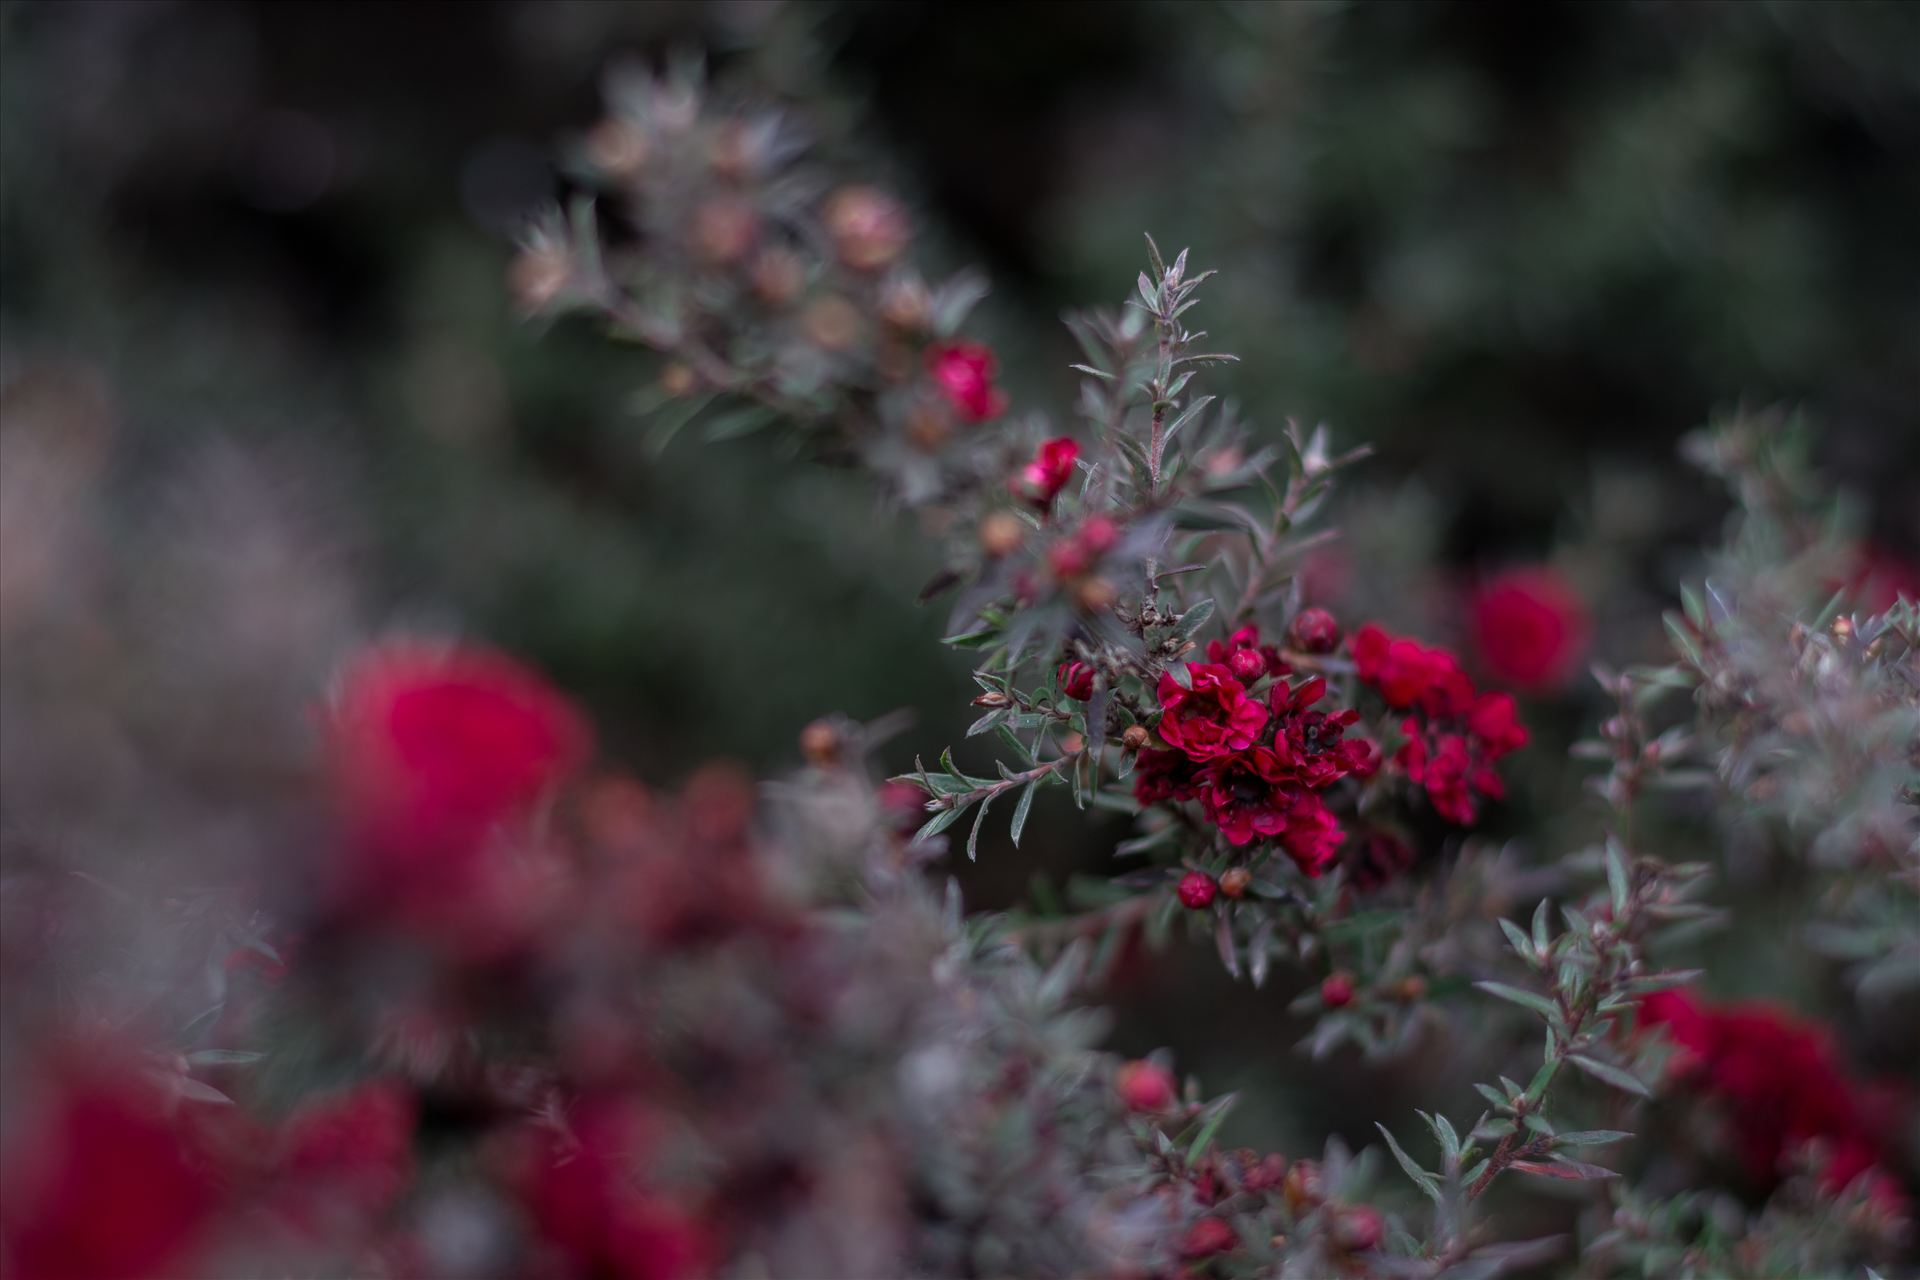 Red Blossoms Bokeh 2 10252015.jpg - Winter is on the way, Christmas is around the corner. by Sarah Williams